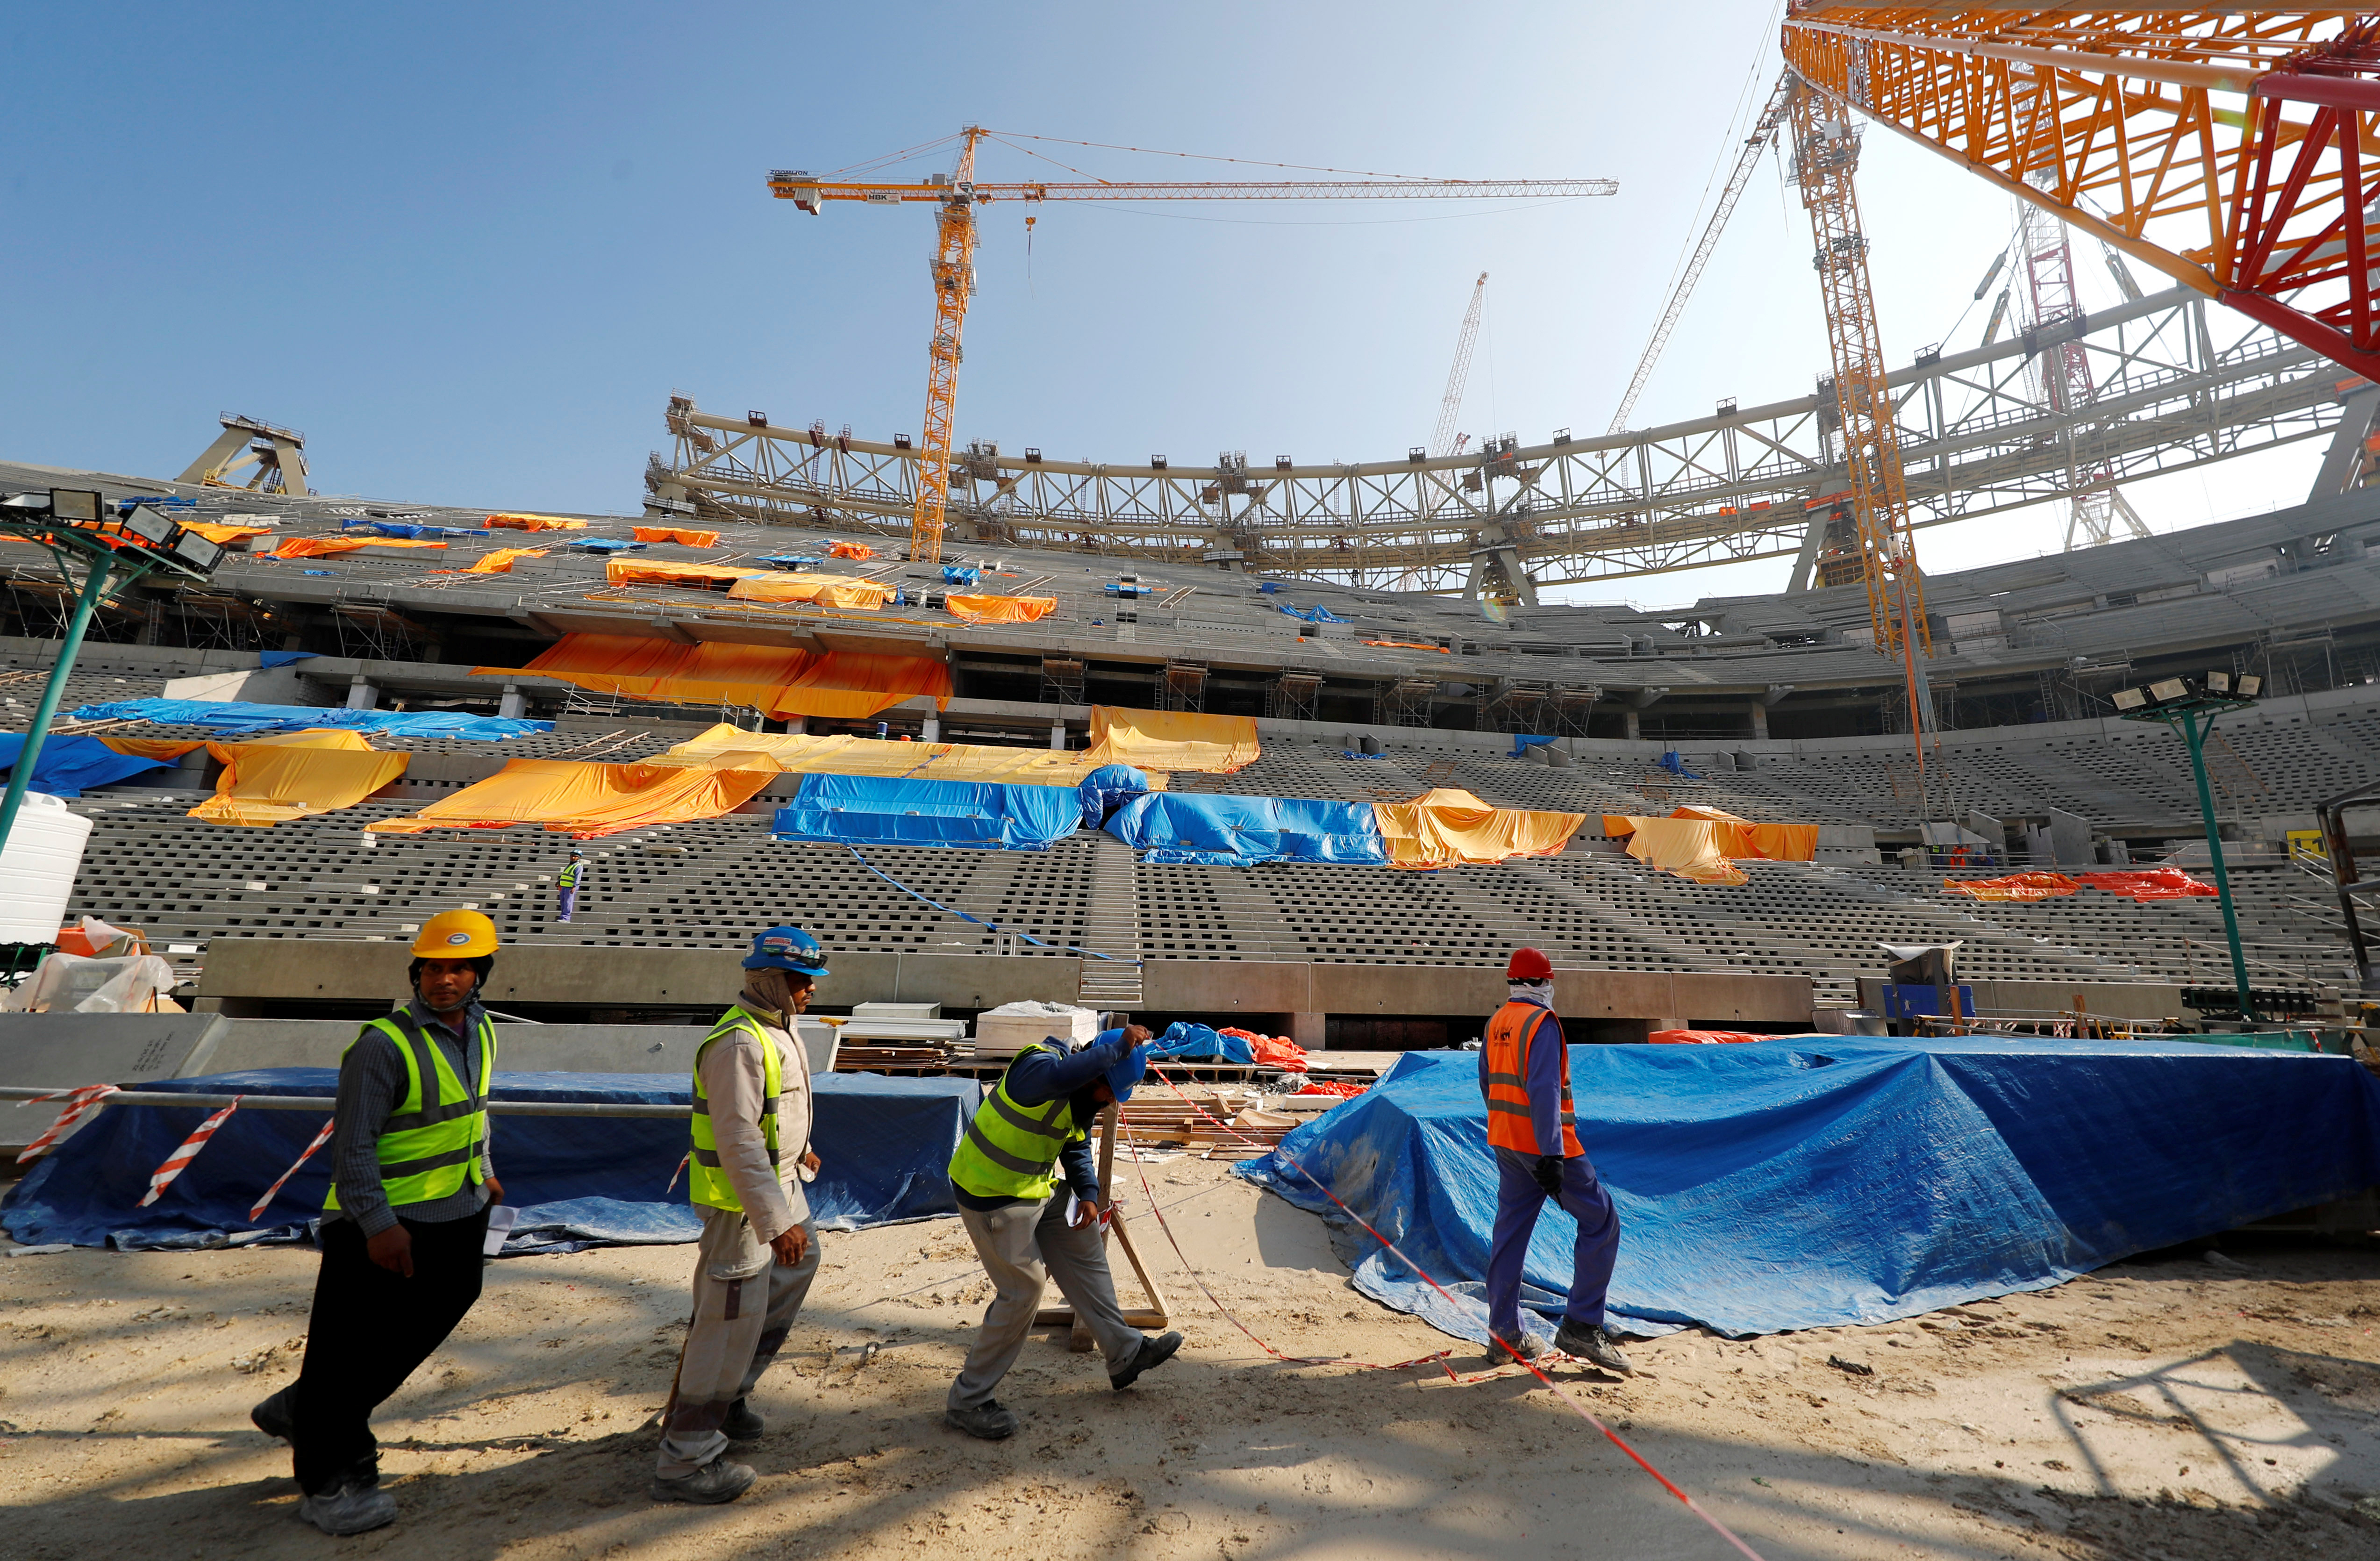 Workers are seen inside the Lusail stadium which is under construction for the upcoming 2022 Fifa soccer World Cup during a stadium tour in Doha